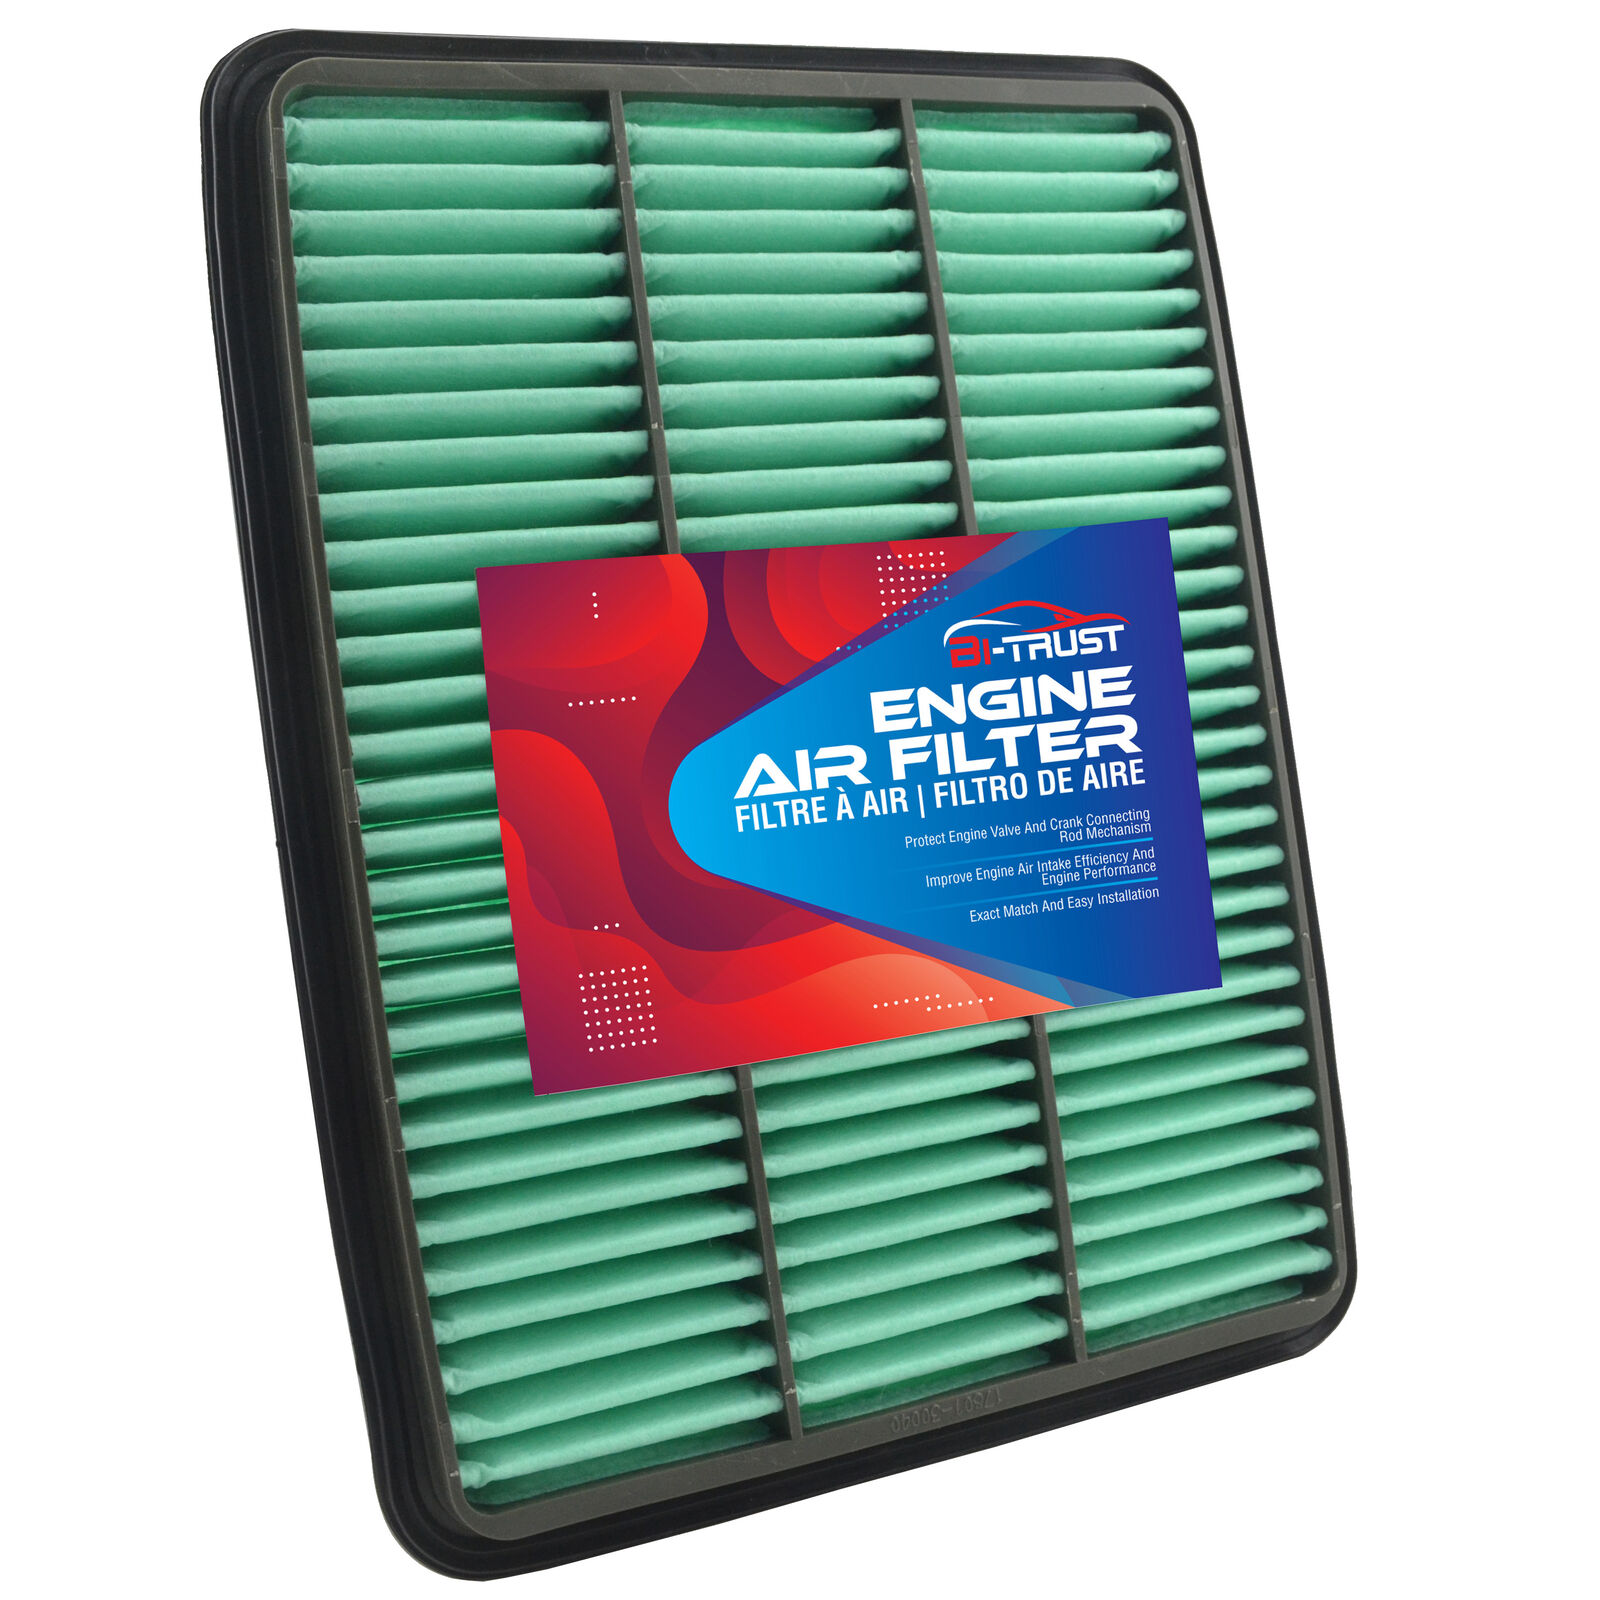 Engine Air Filter for Lexus LX470 GX470 Toyota Tundra Sequoia 4Runner 2009 2008